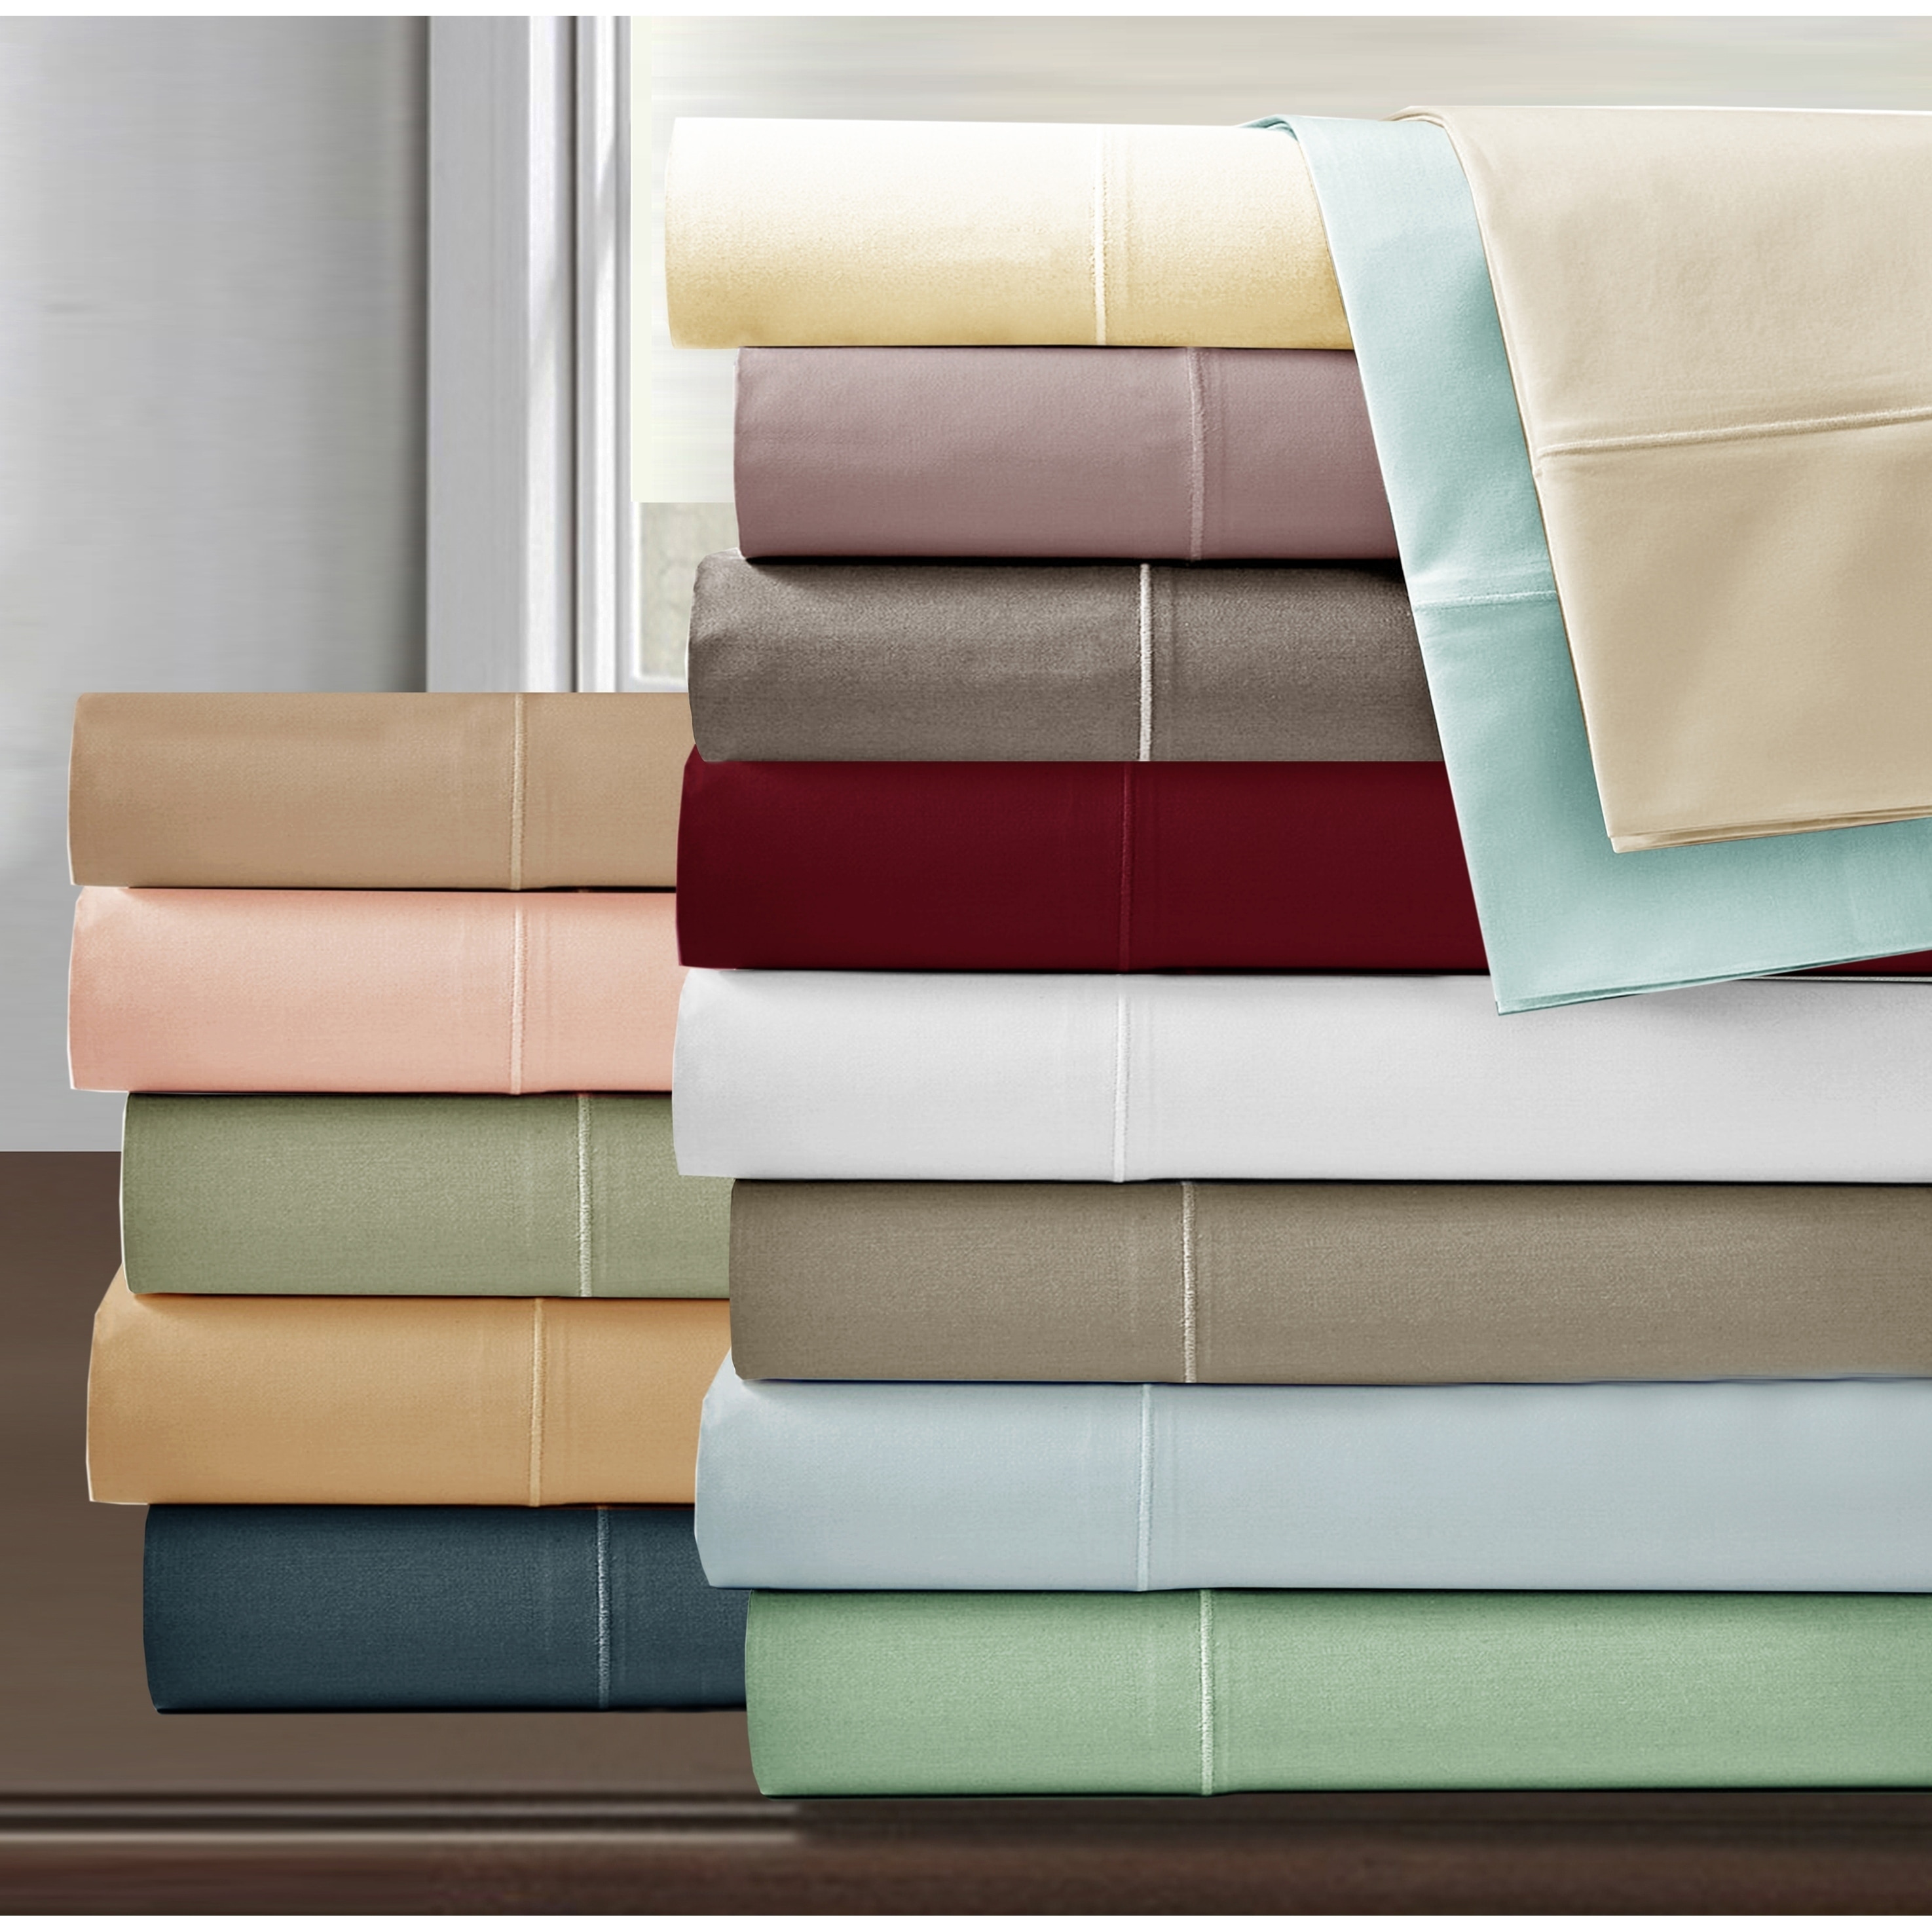 Solid Colored Egyptian Cotton 1000 Thread Count 4 piece Sheet Set